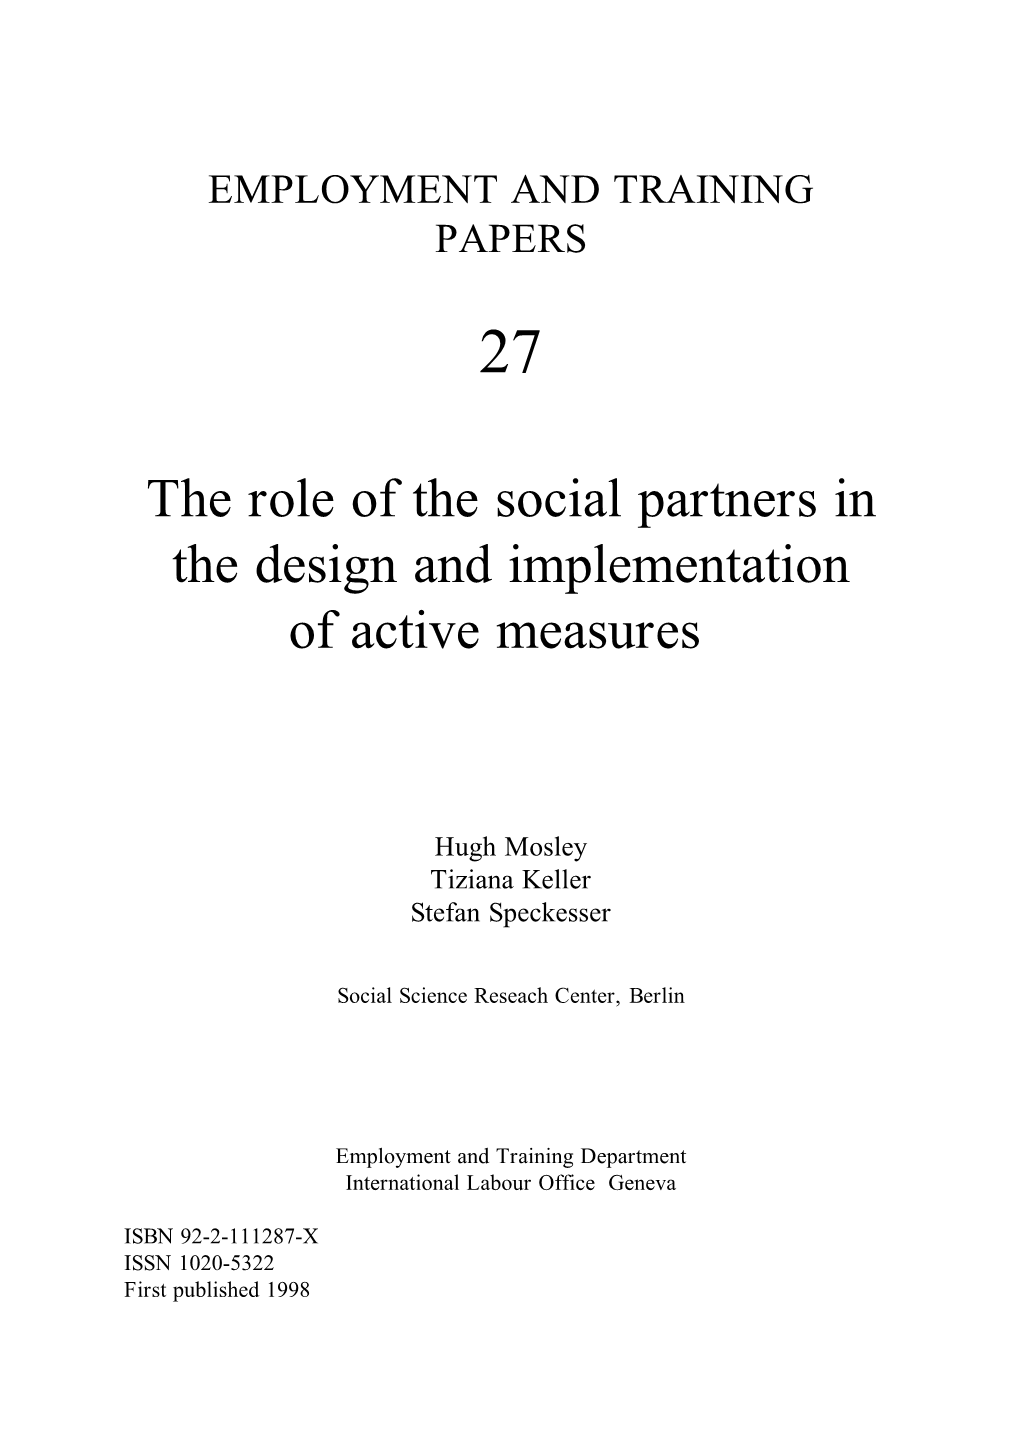 The Role of the Social Partners in the Design and Implementation of Active Measures